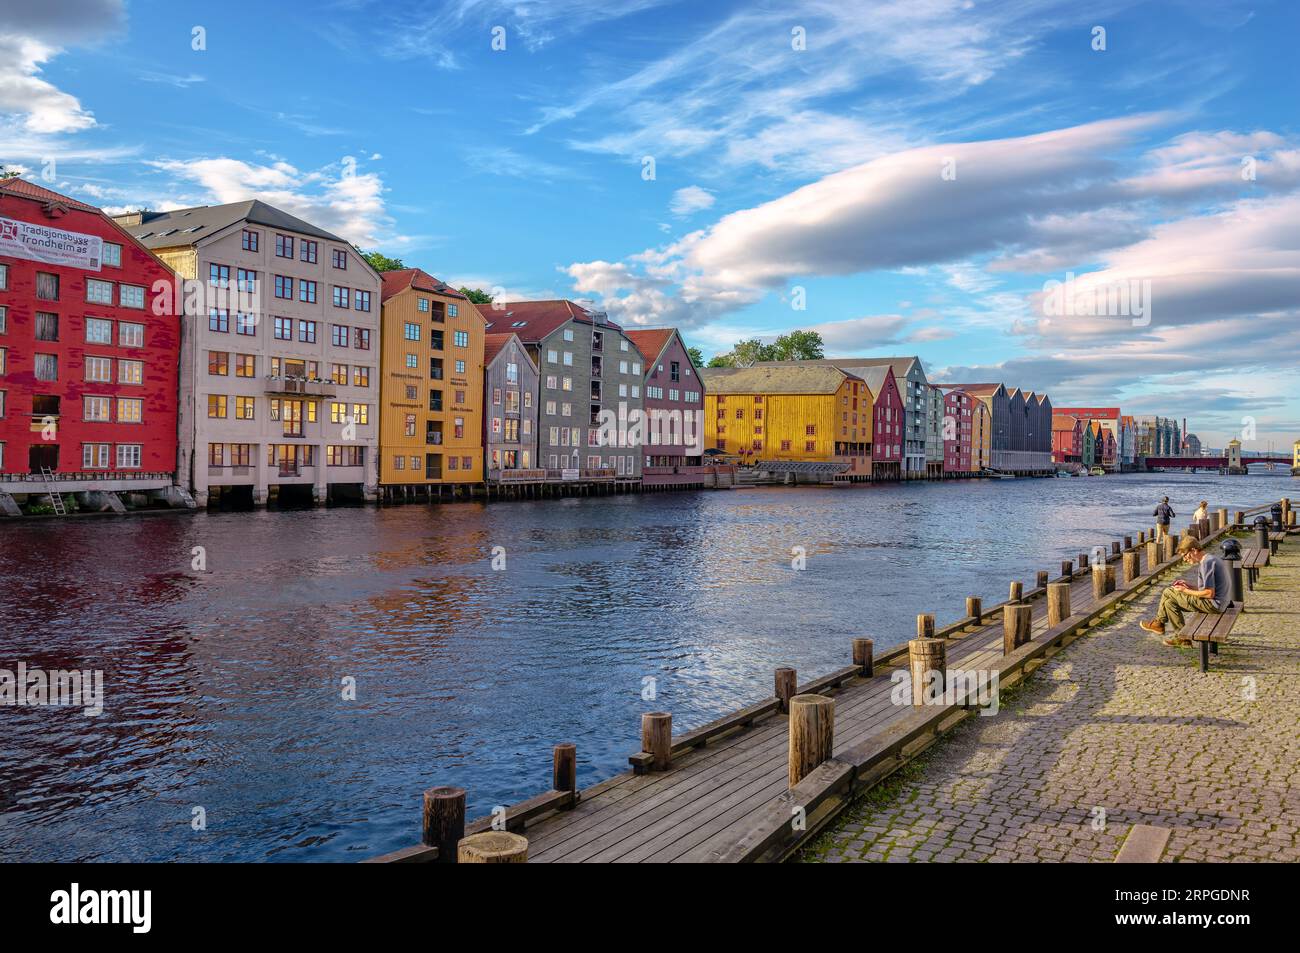 Trondheim, Norway - August 19 2022: River Nidelva, with the inner city's iconic waterside warehouses on a sunny afternoon. Stock Photo